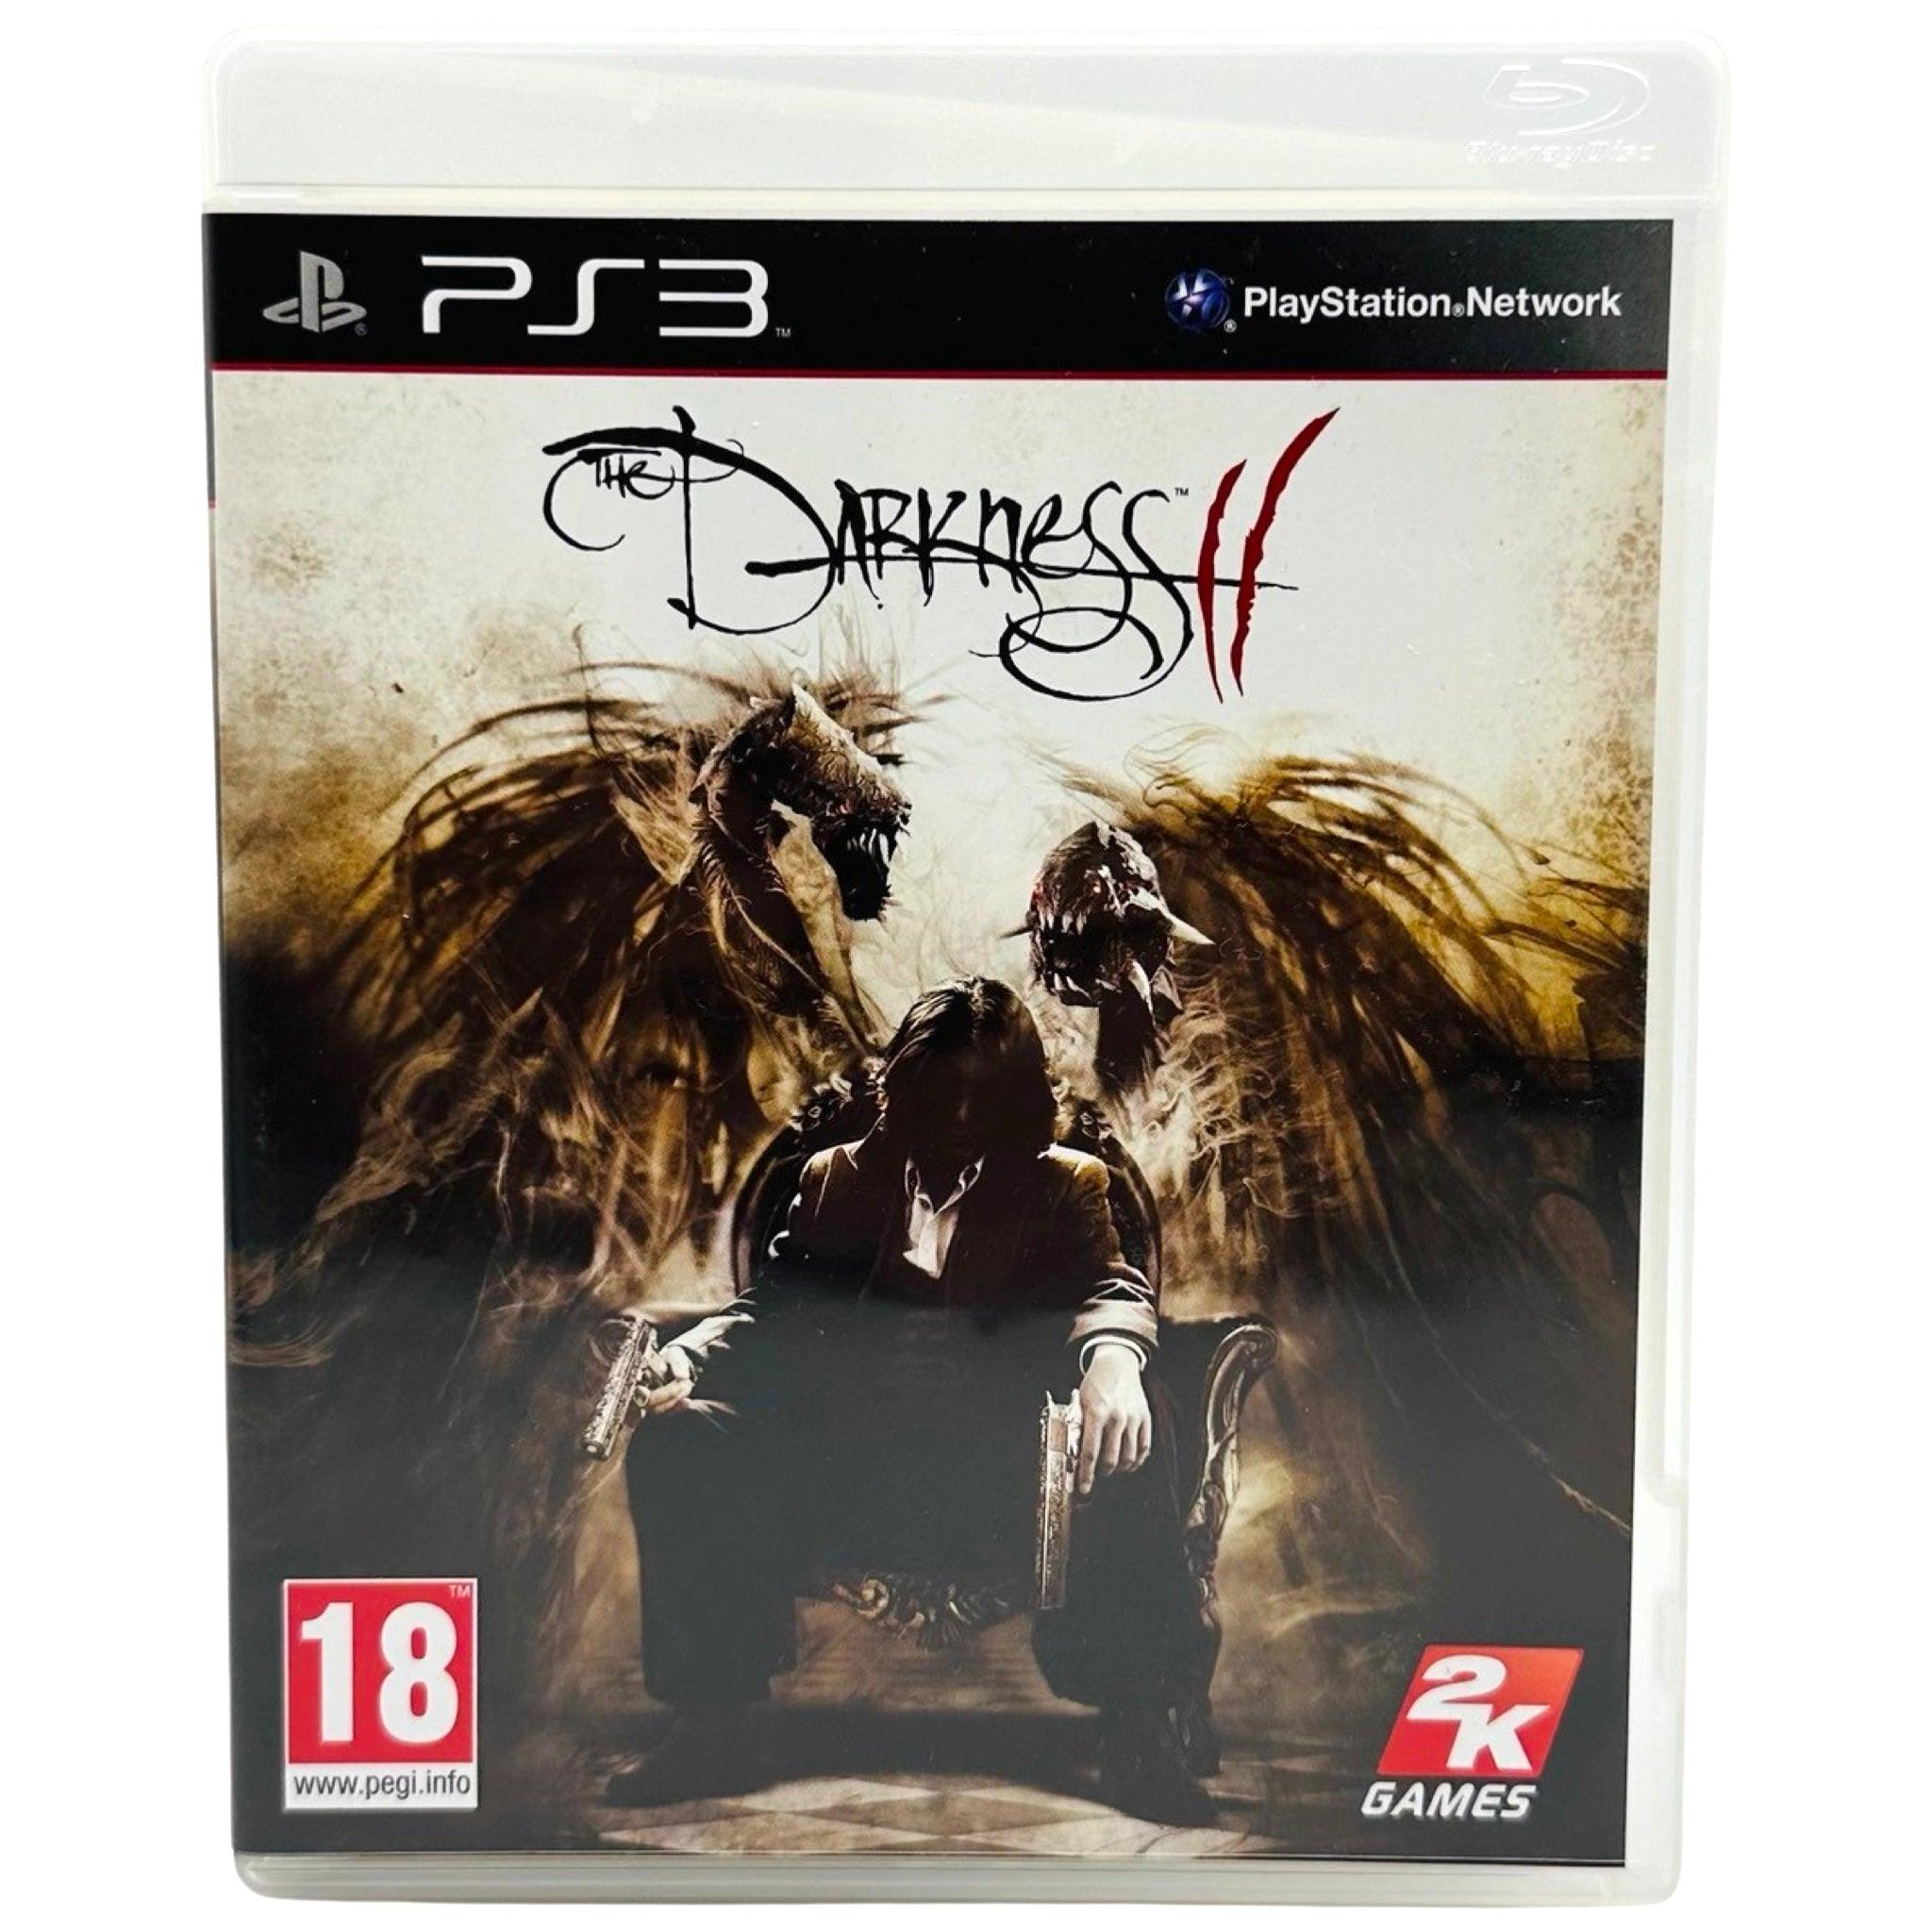 PS3: The Darkness II - RetroGaming.no